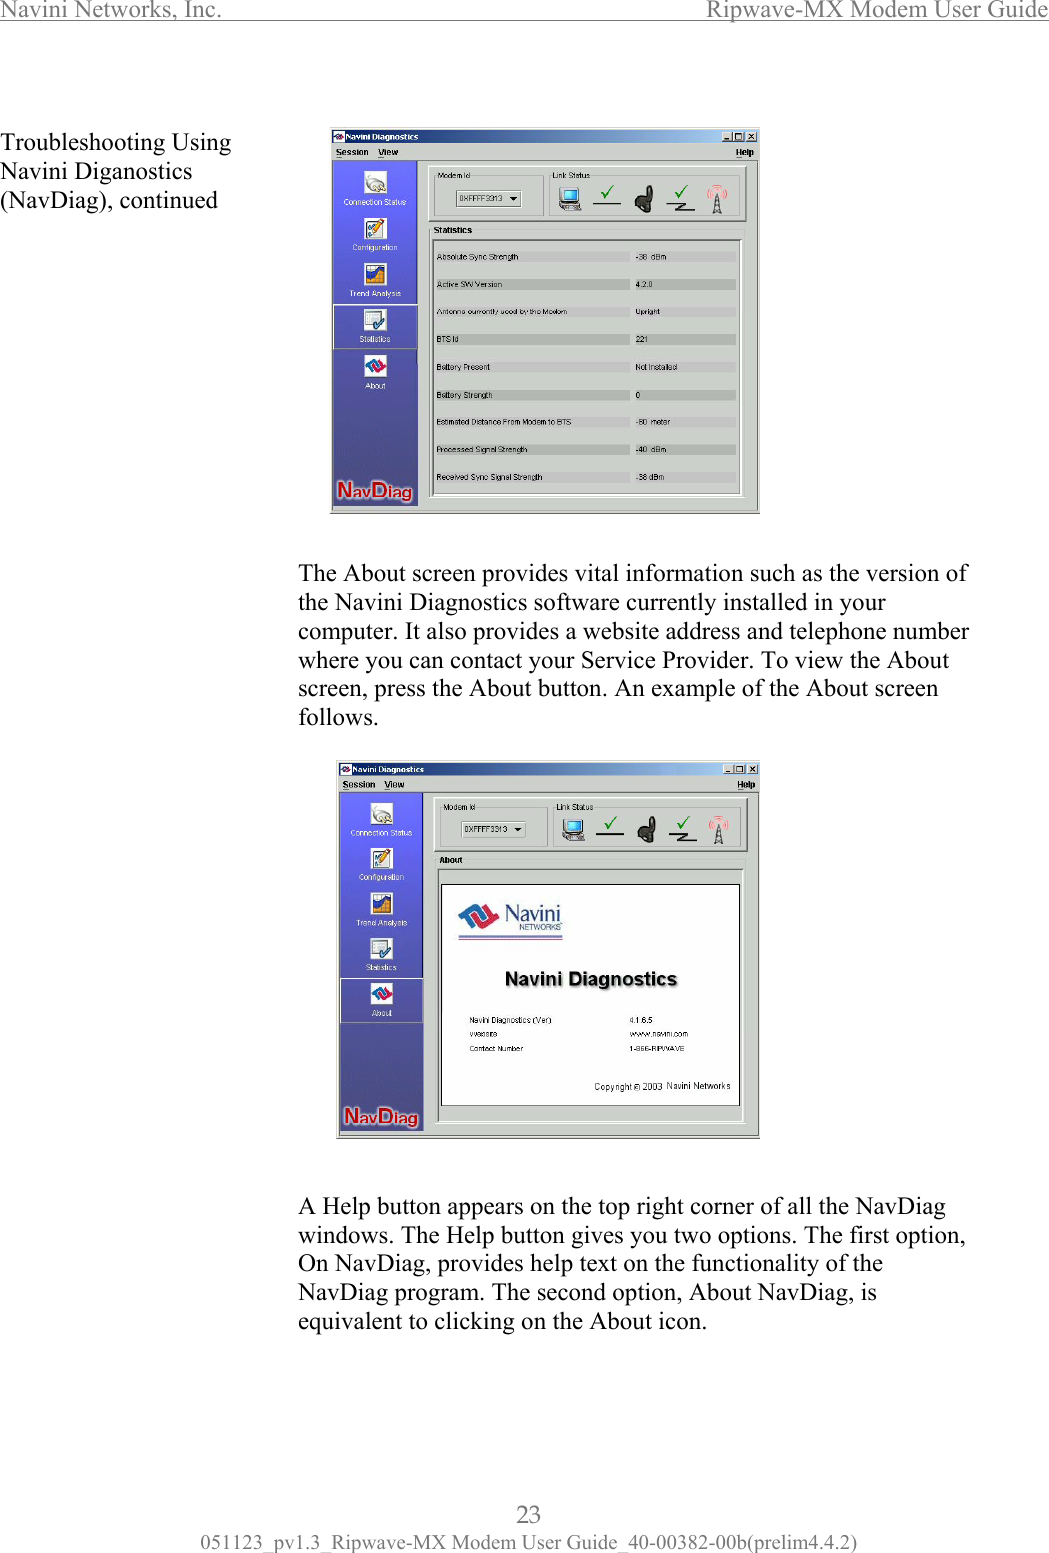 Navini Networks, Inc.                  Ripwave-MX Modem User Guide  Troubleshooting Using Navini Diganostics (NavDiag), continued                                                           The About screen provides vital information such as the version of r tton. An example of the About screen llows. pears on the top right corner of all the NavDiag indows. The Help button gives you two options. The first option, n NavDiag, provides help text on the functionality of the avDiag program. The second option, About NavDiag, is quivalent to clicking on the About icon.  the Navini Diagnostics software currently installed in your computer. It also provides a website address and telephone numbewhere you can contact your Service Provider. To view the About screen, press the About bufo                A Help button apwONe 23 051123_pv1.3_Ripwave-MX Modem User Guide_40-00382-00b(prelim4.4.2) 